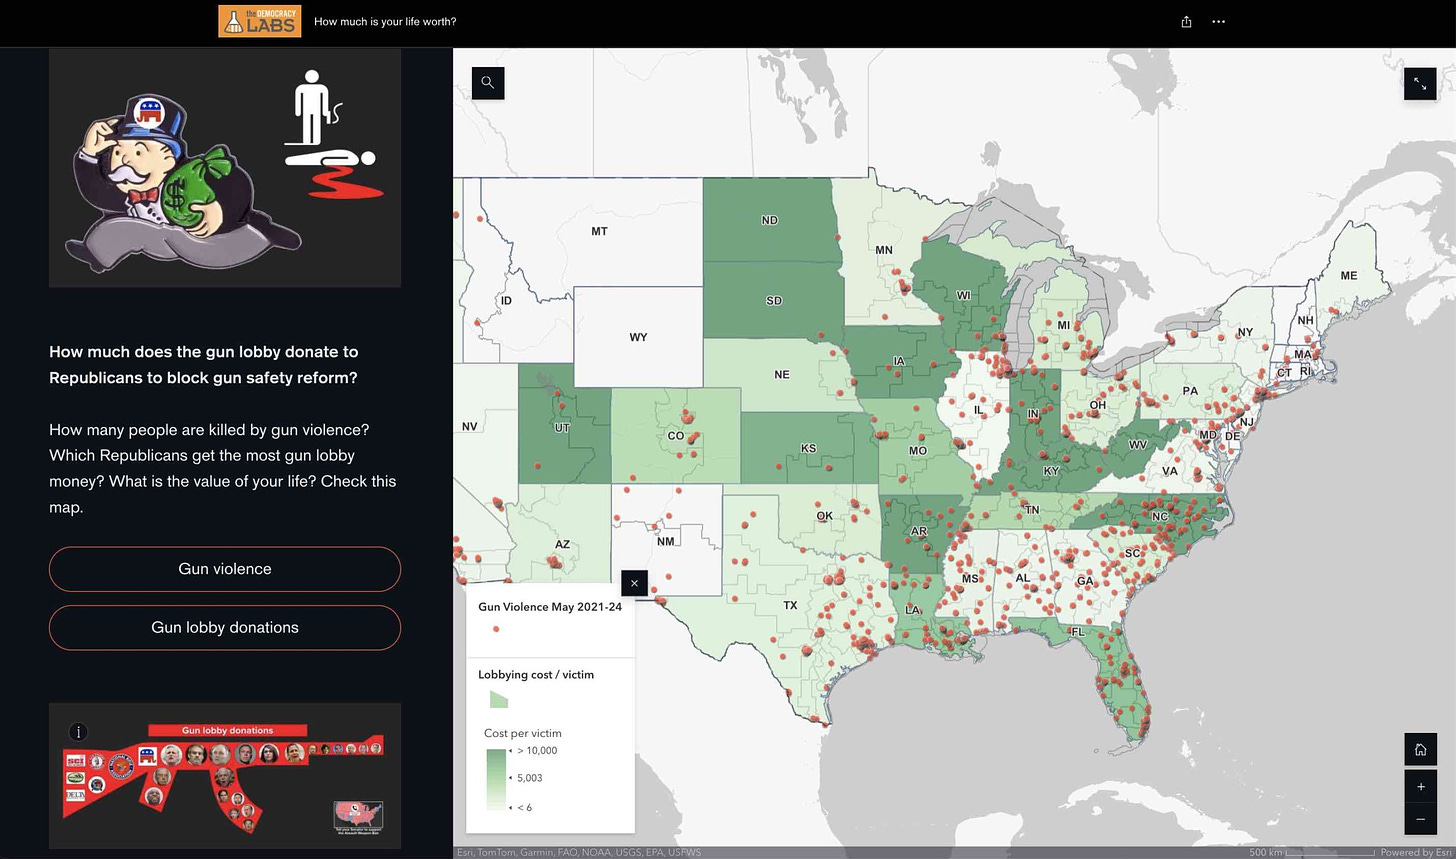 Mapping the number of gun violence victims vs gun lobby donations in a sate